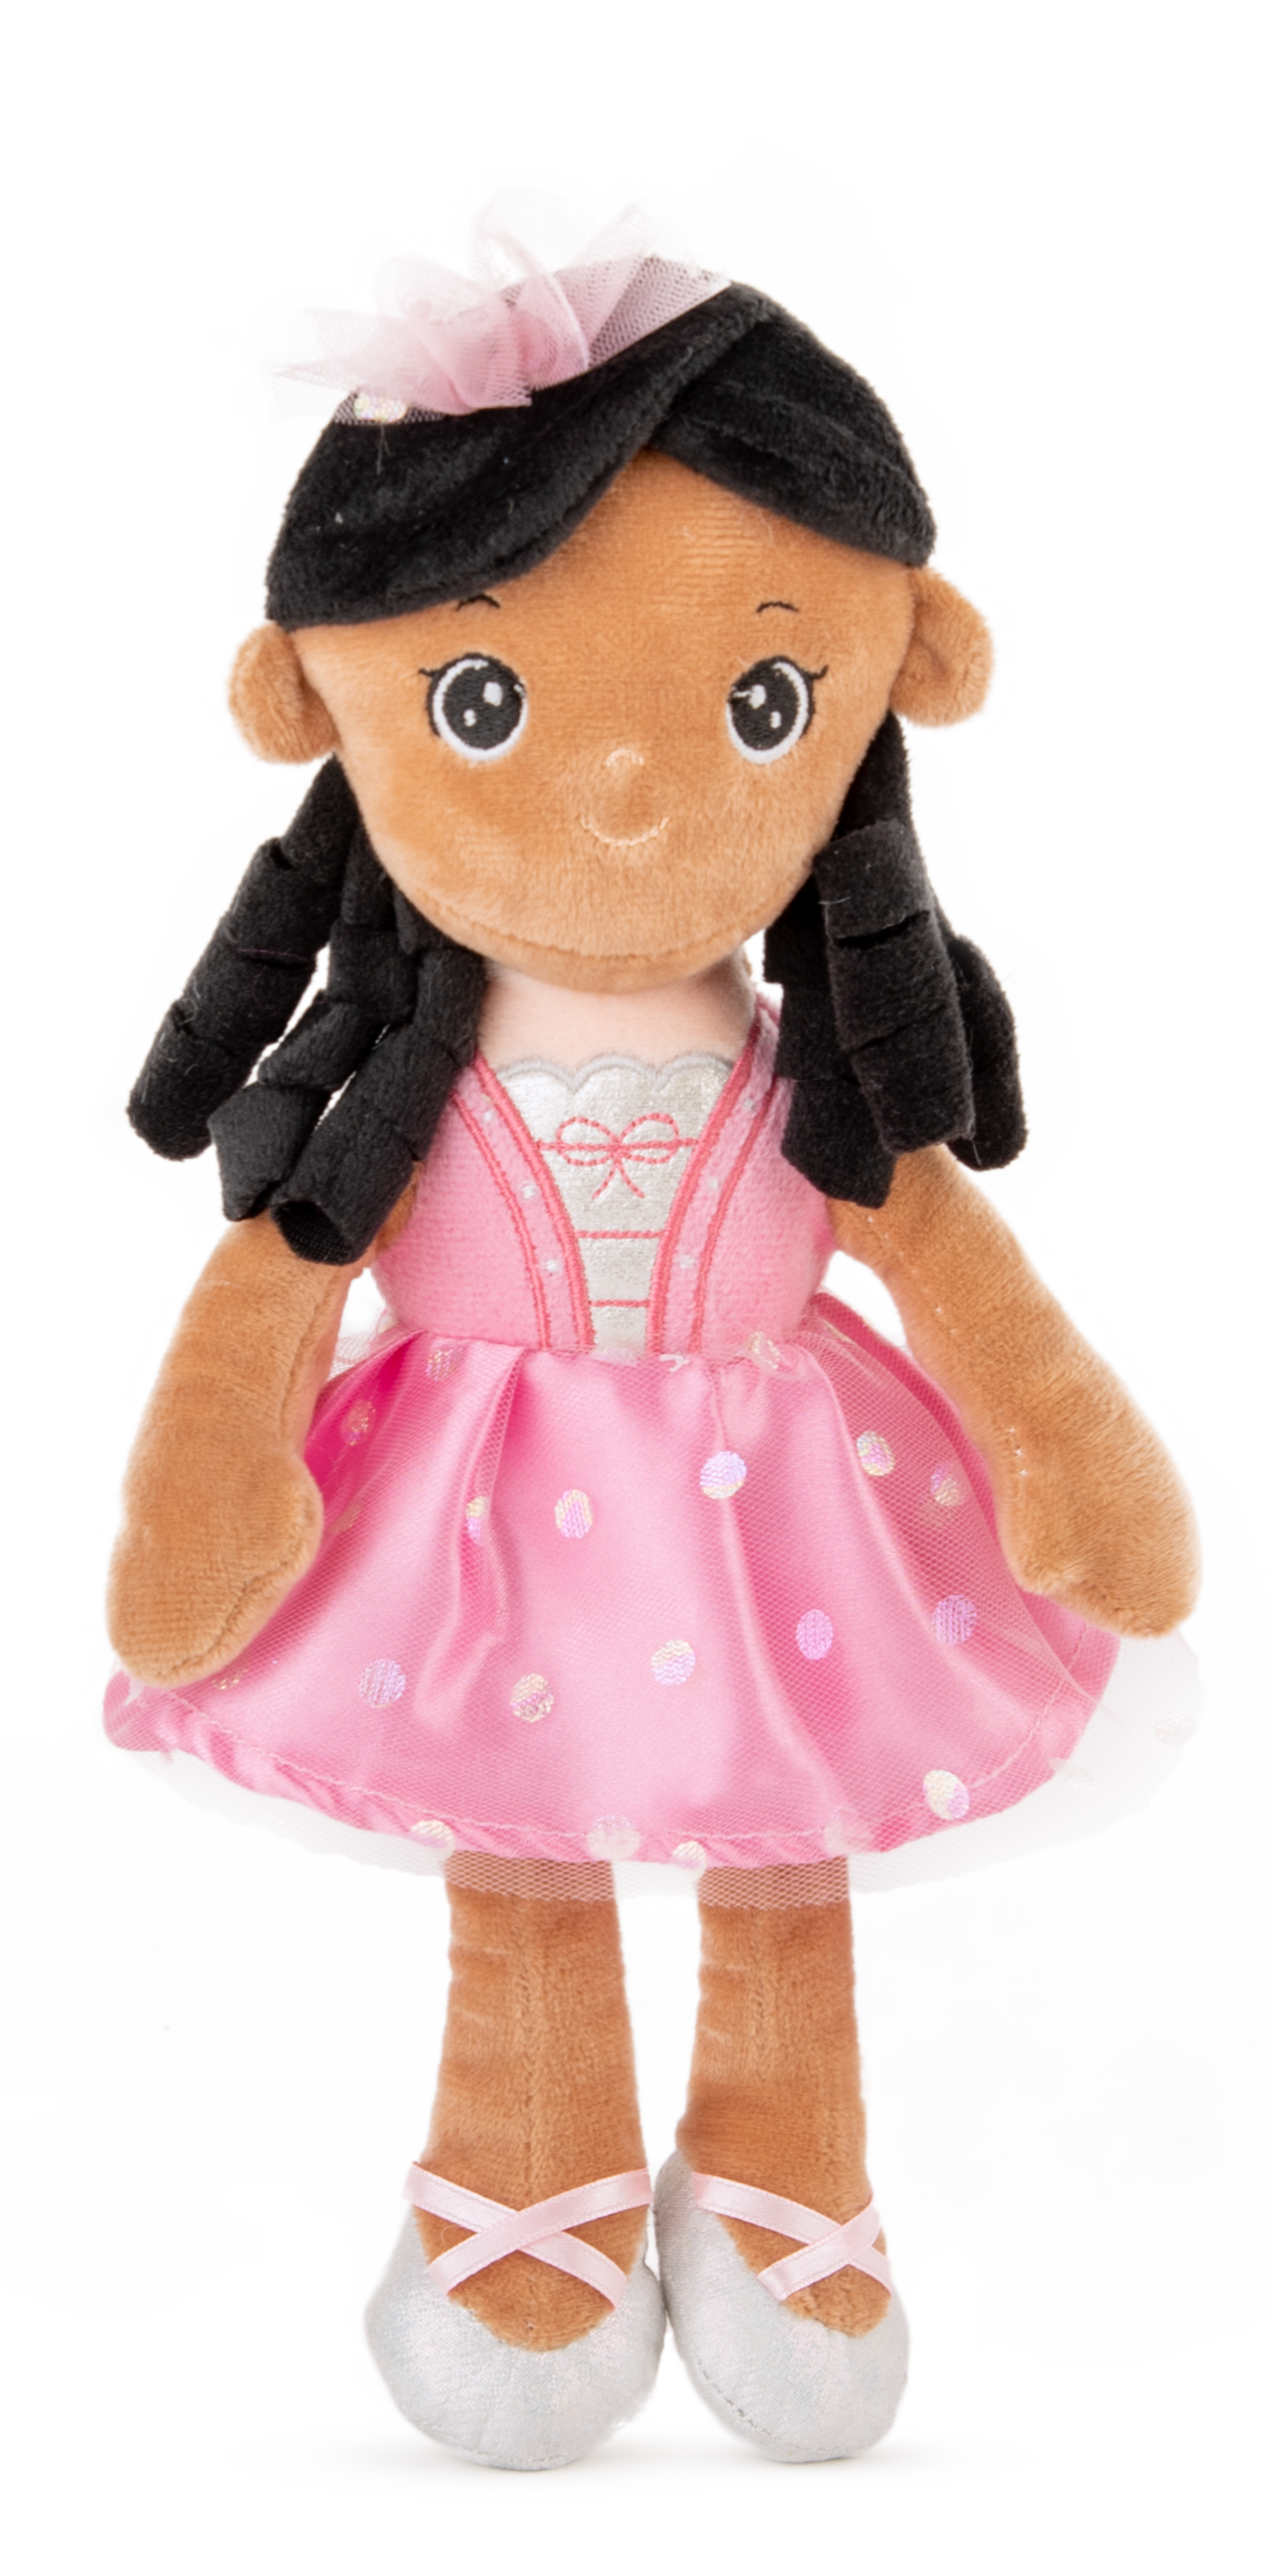 Doll with dress - Light pink